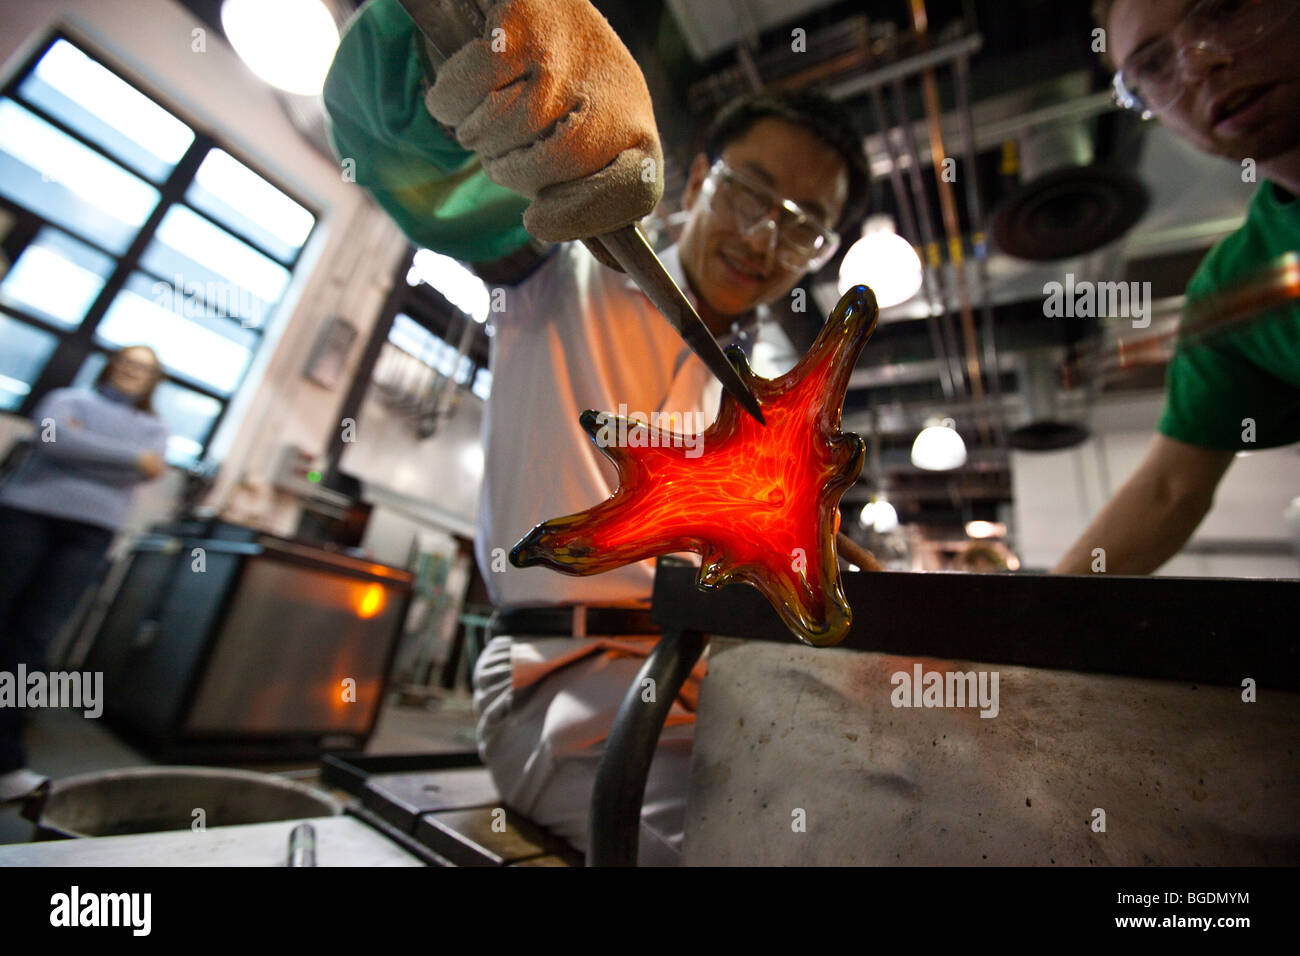 Glass making activity at the Corning Museum of Glass in Corning, New York Stock Photo